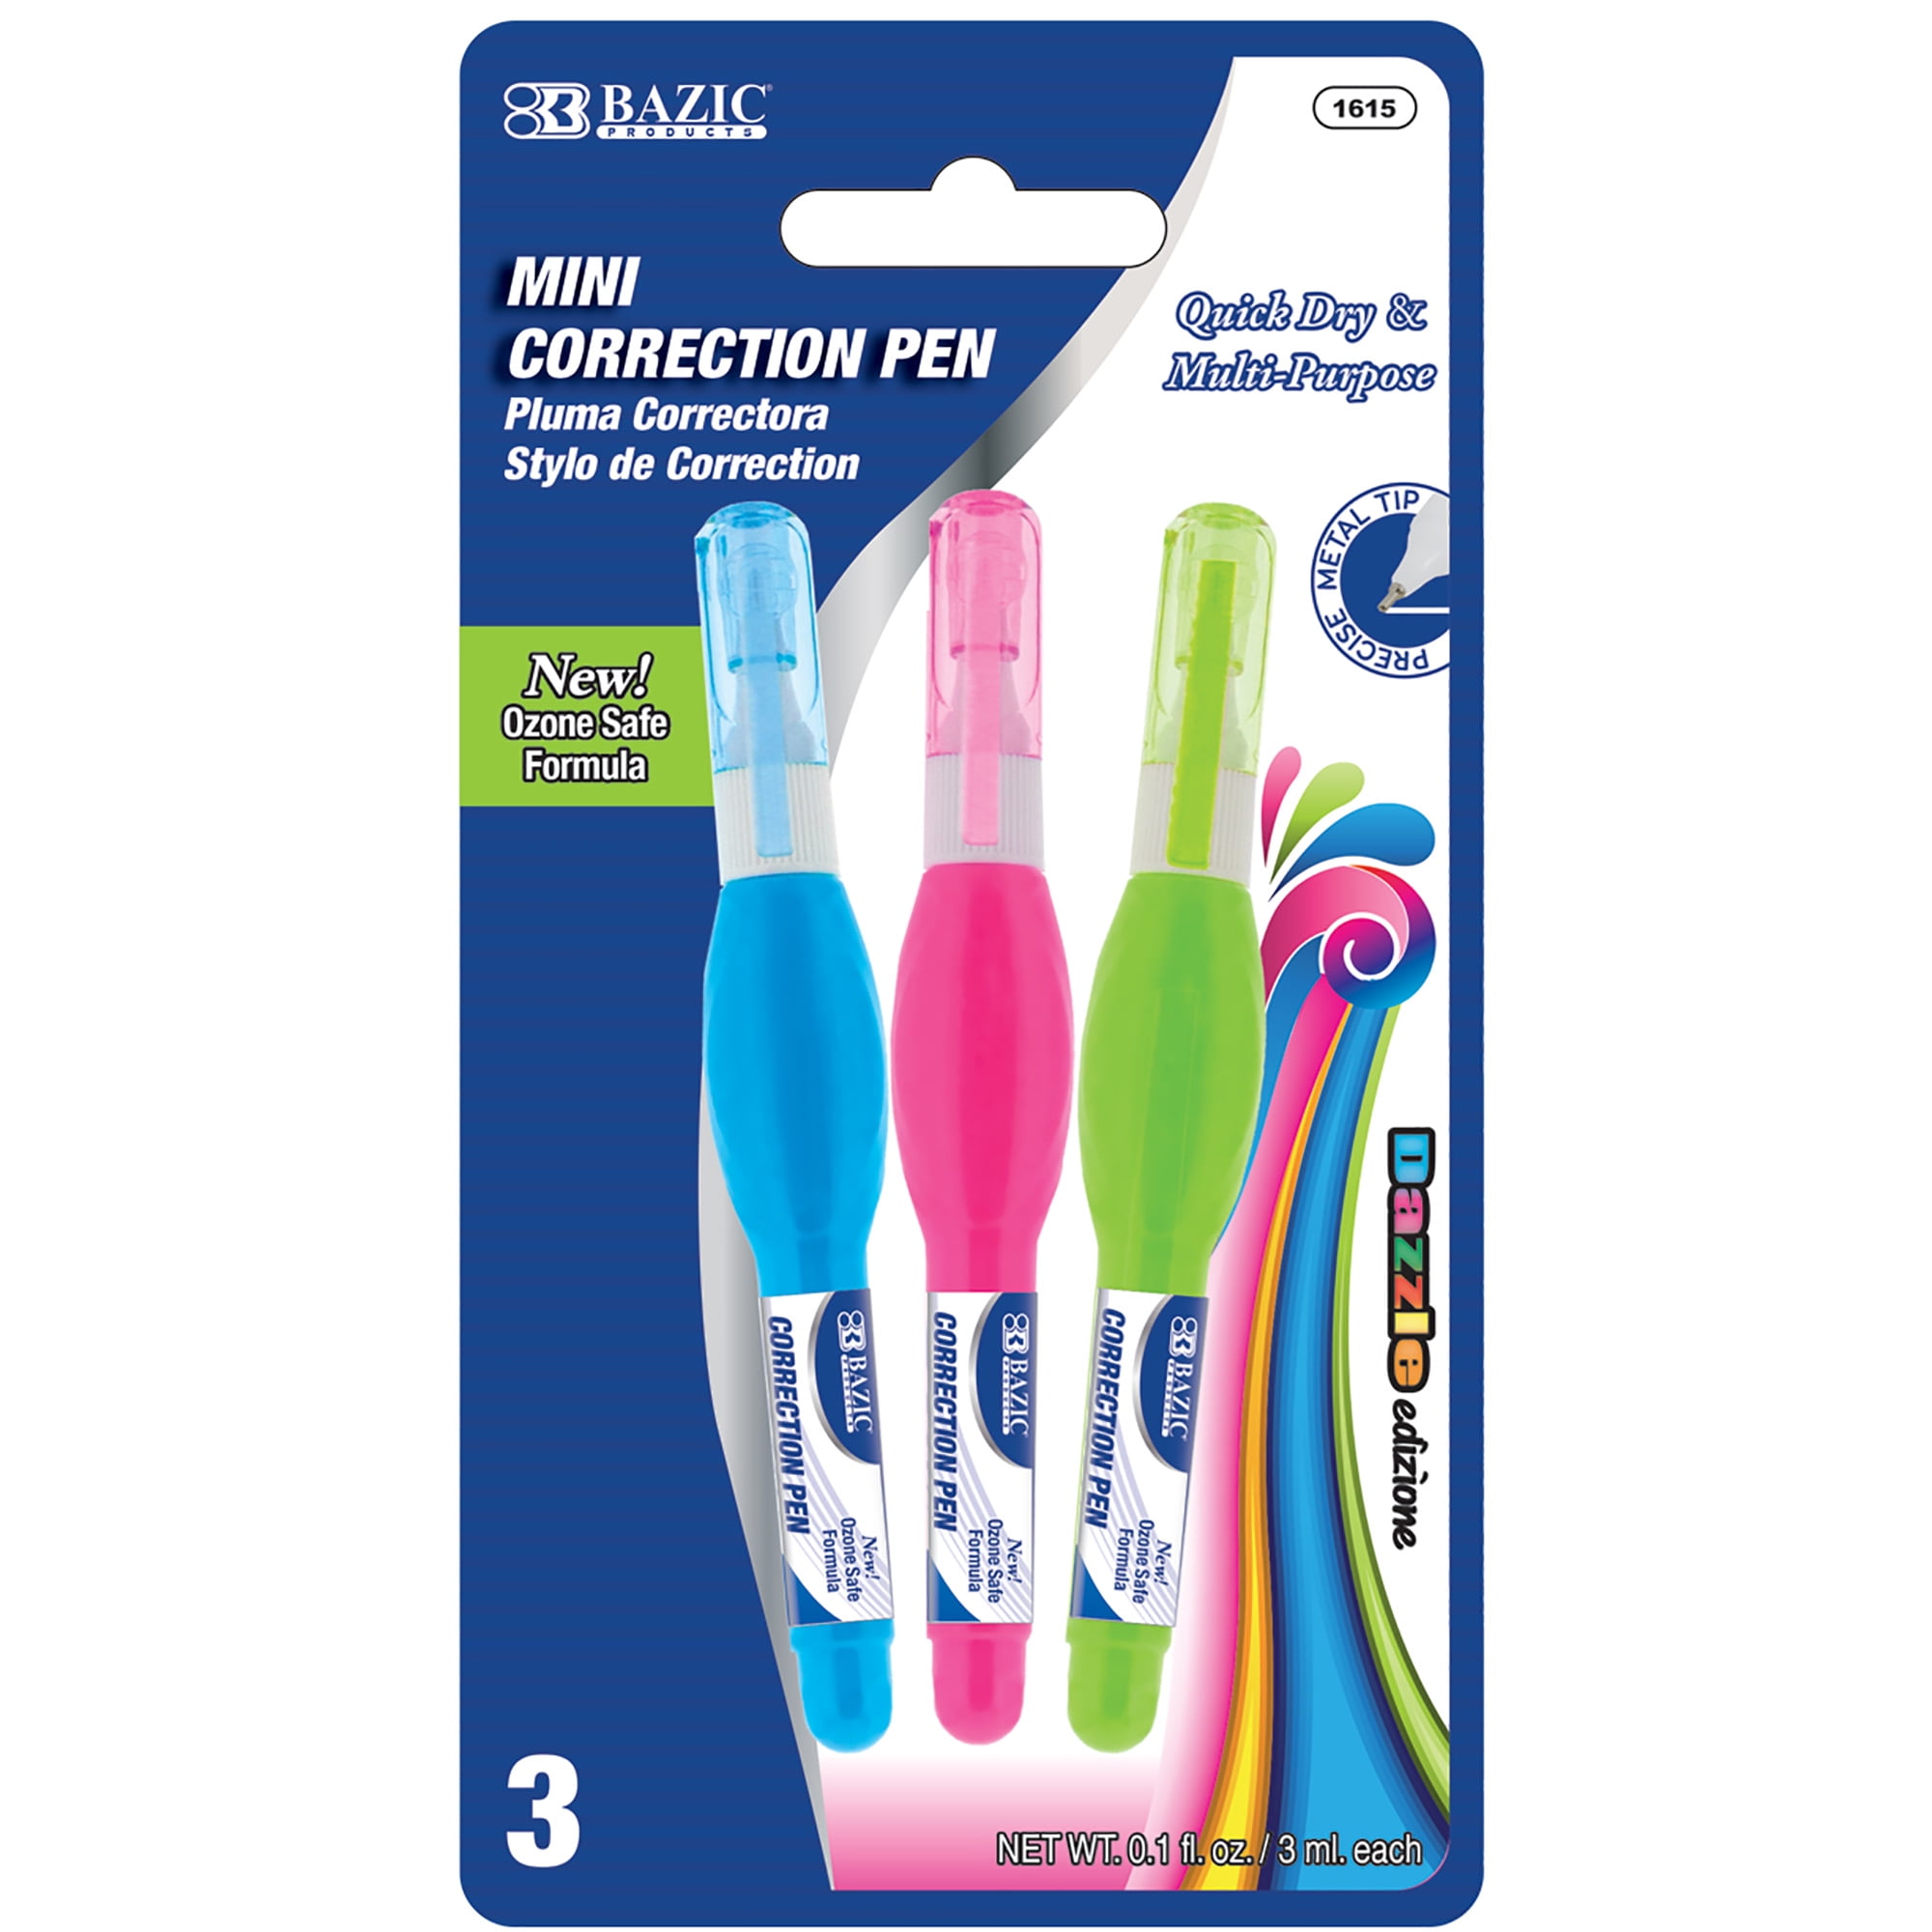 BAZIC Correction Pen White Out 3 ml, Precise Metal Tip (3/Pack), 1-Pack